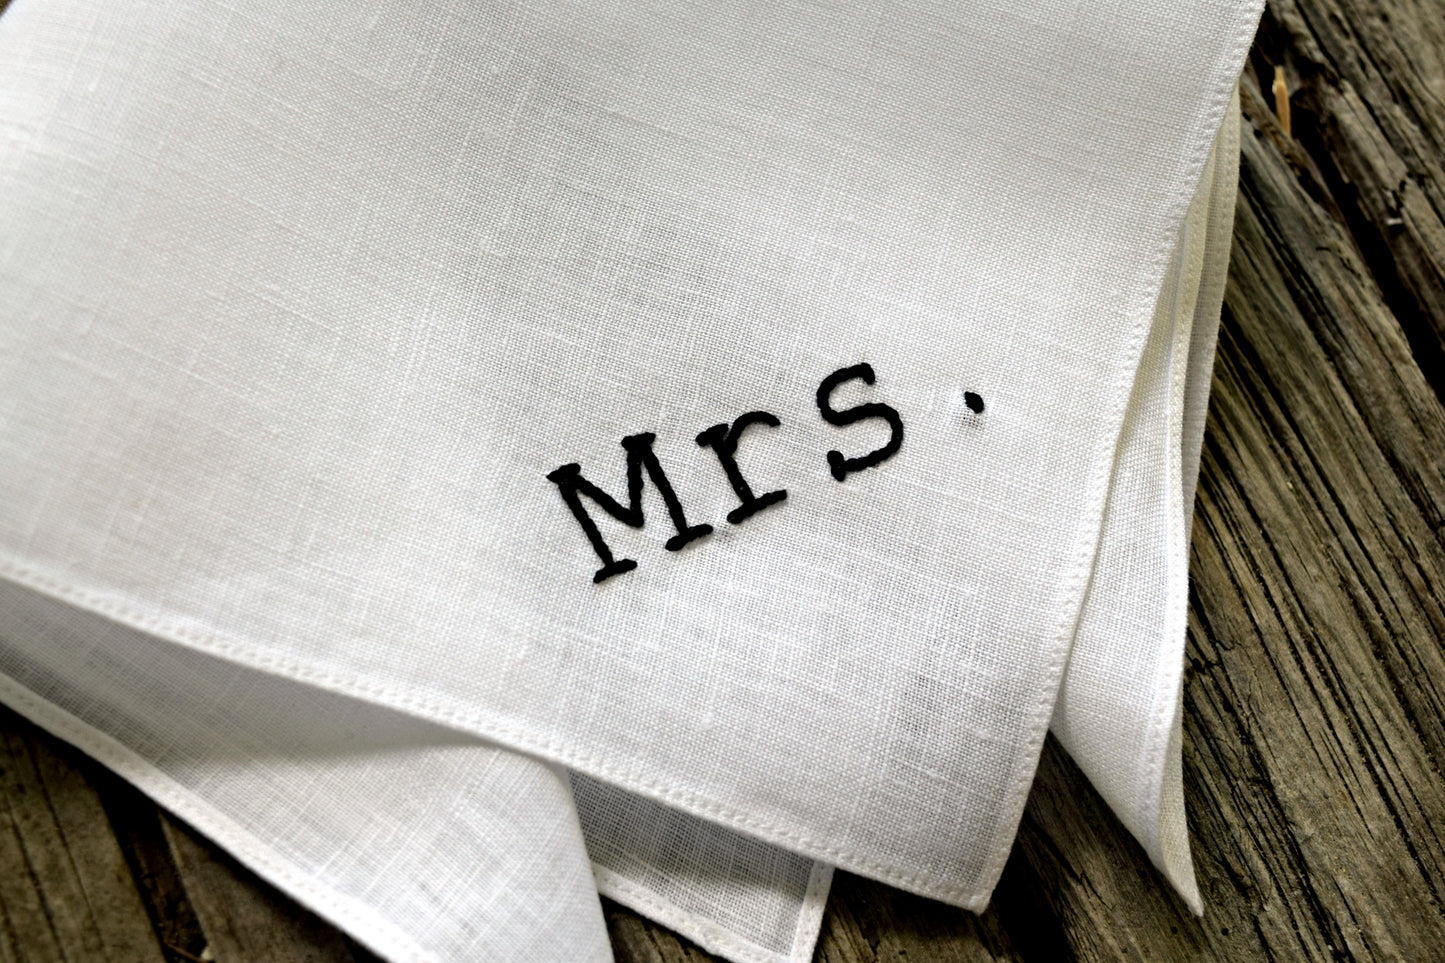 Close up of Mrs. handkerchief showing hand embroidered details